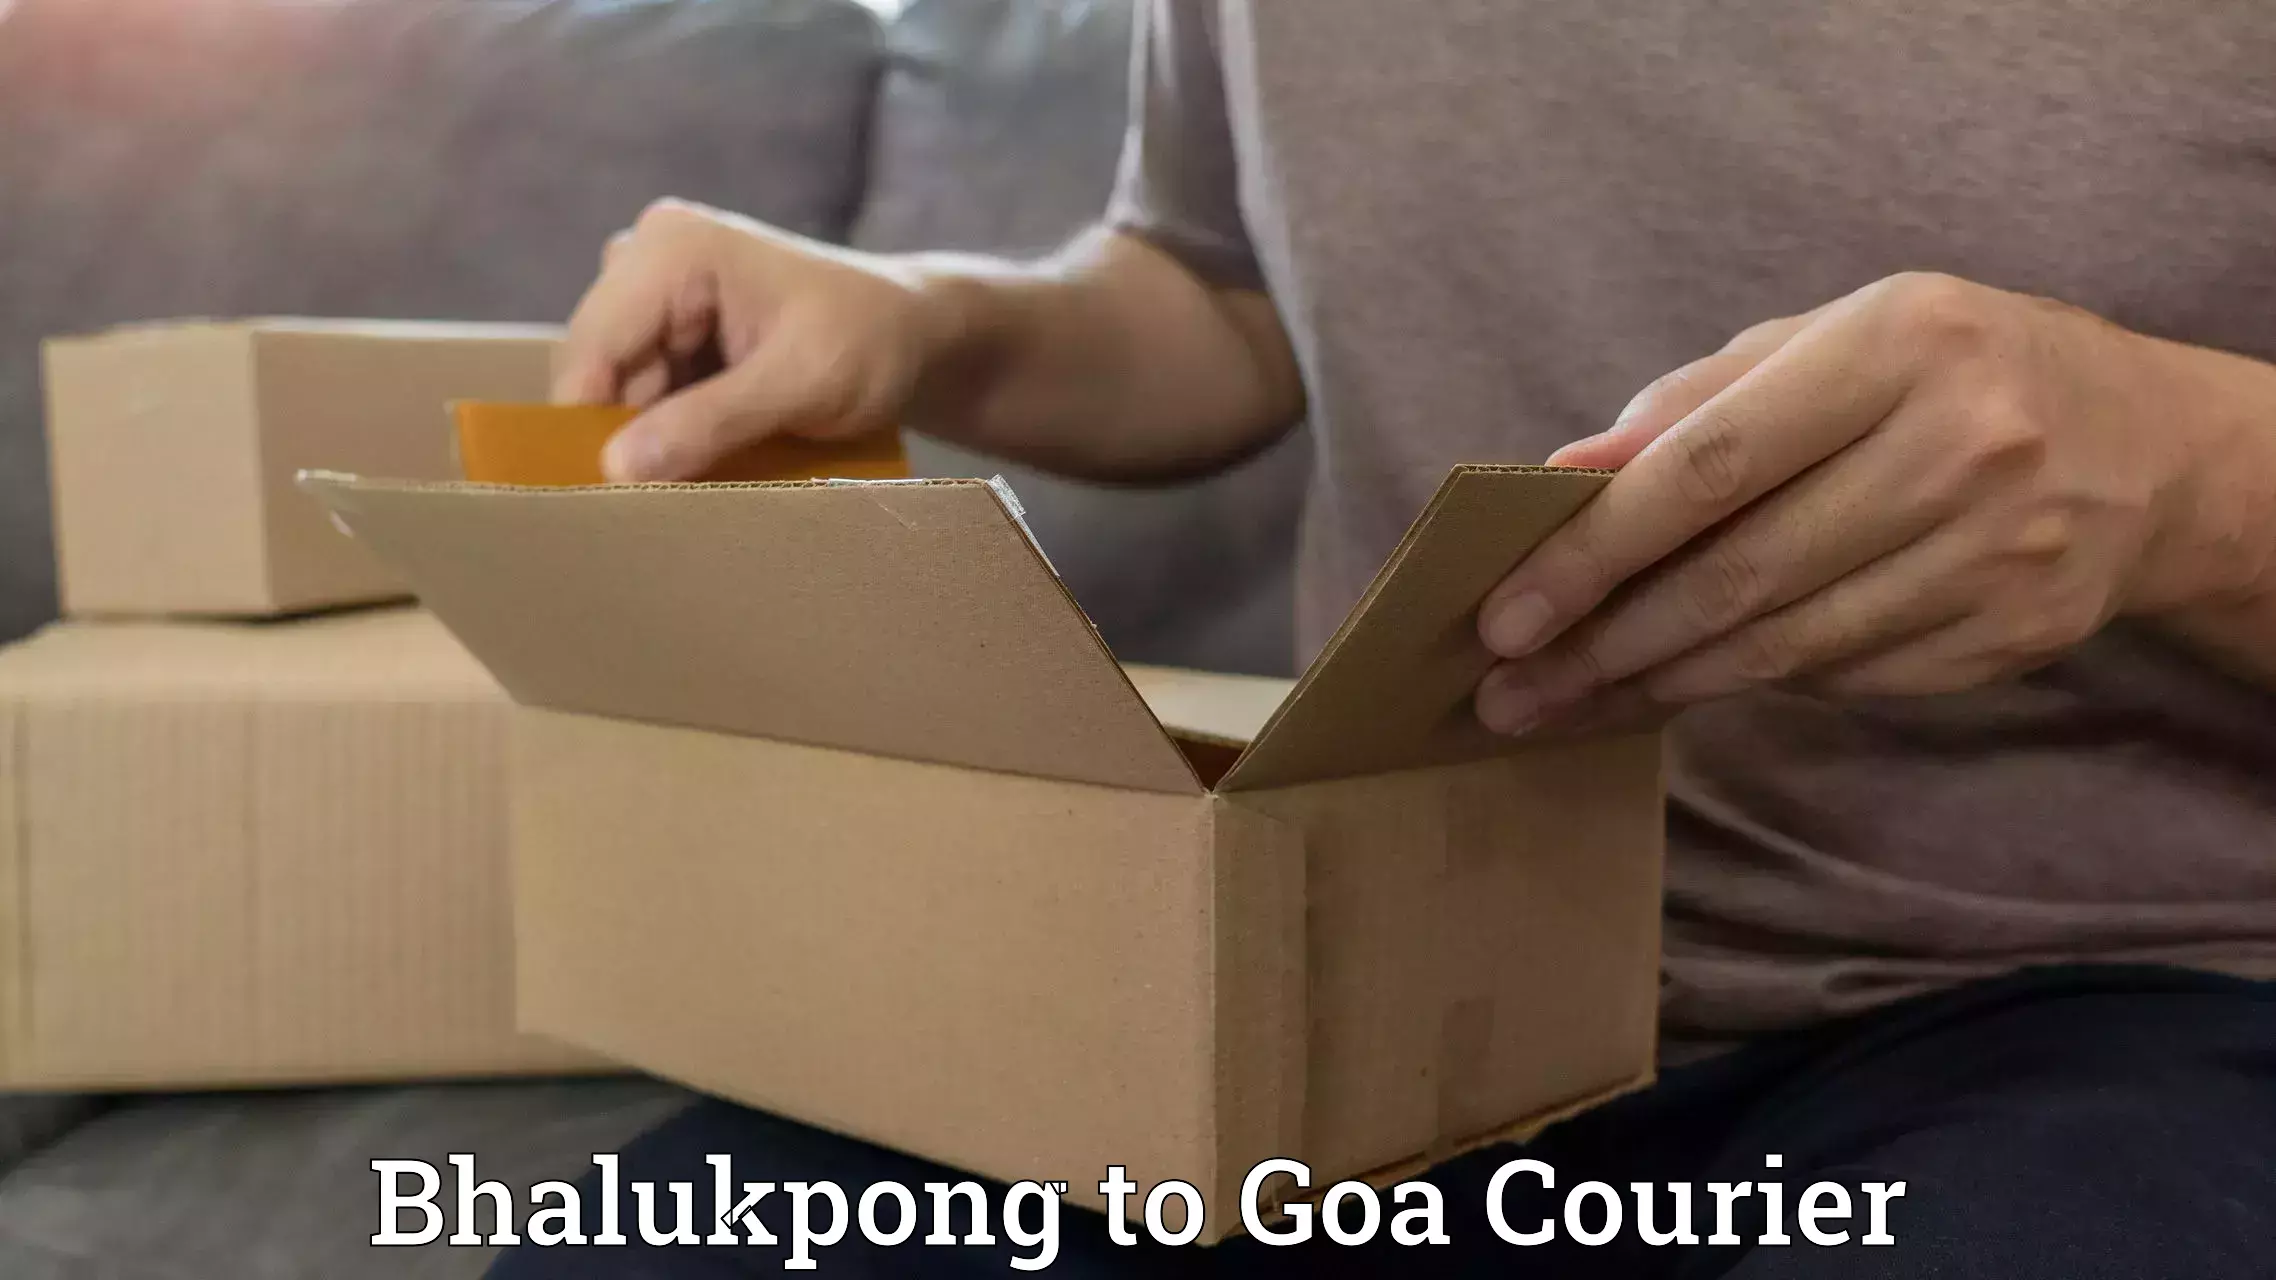 Global courier networks Bhalukpong to Goa